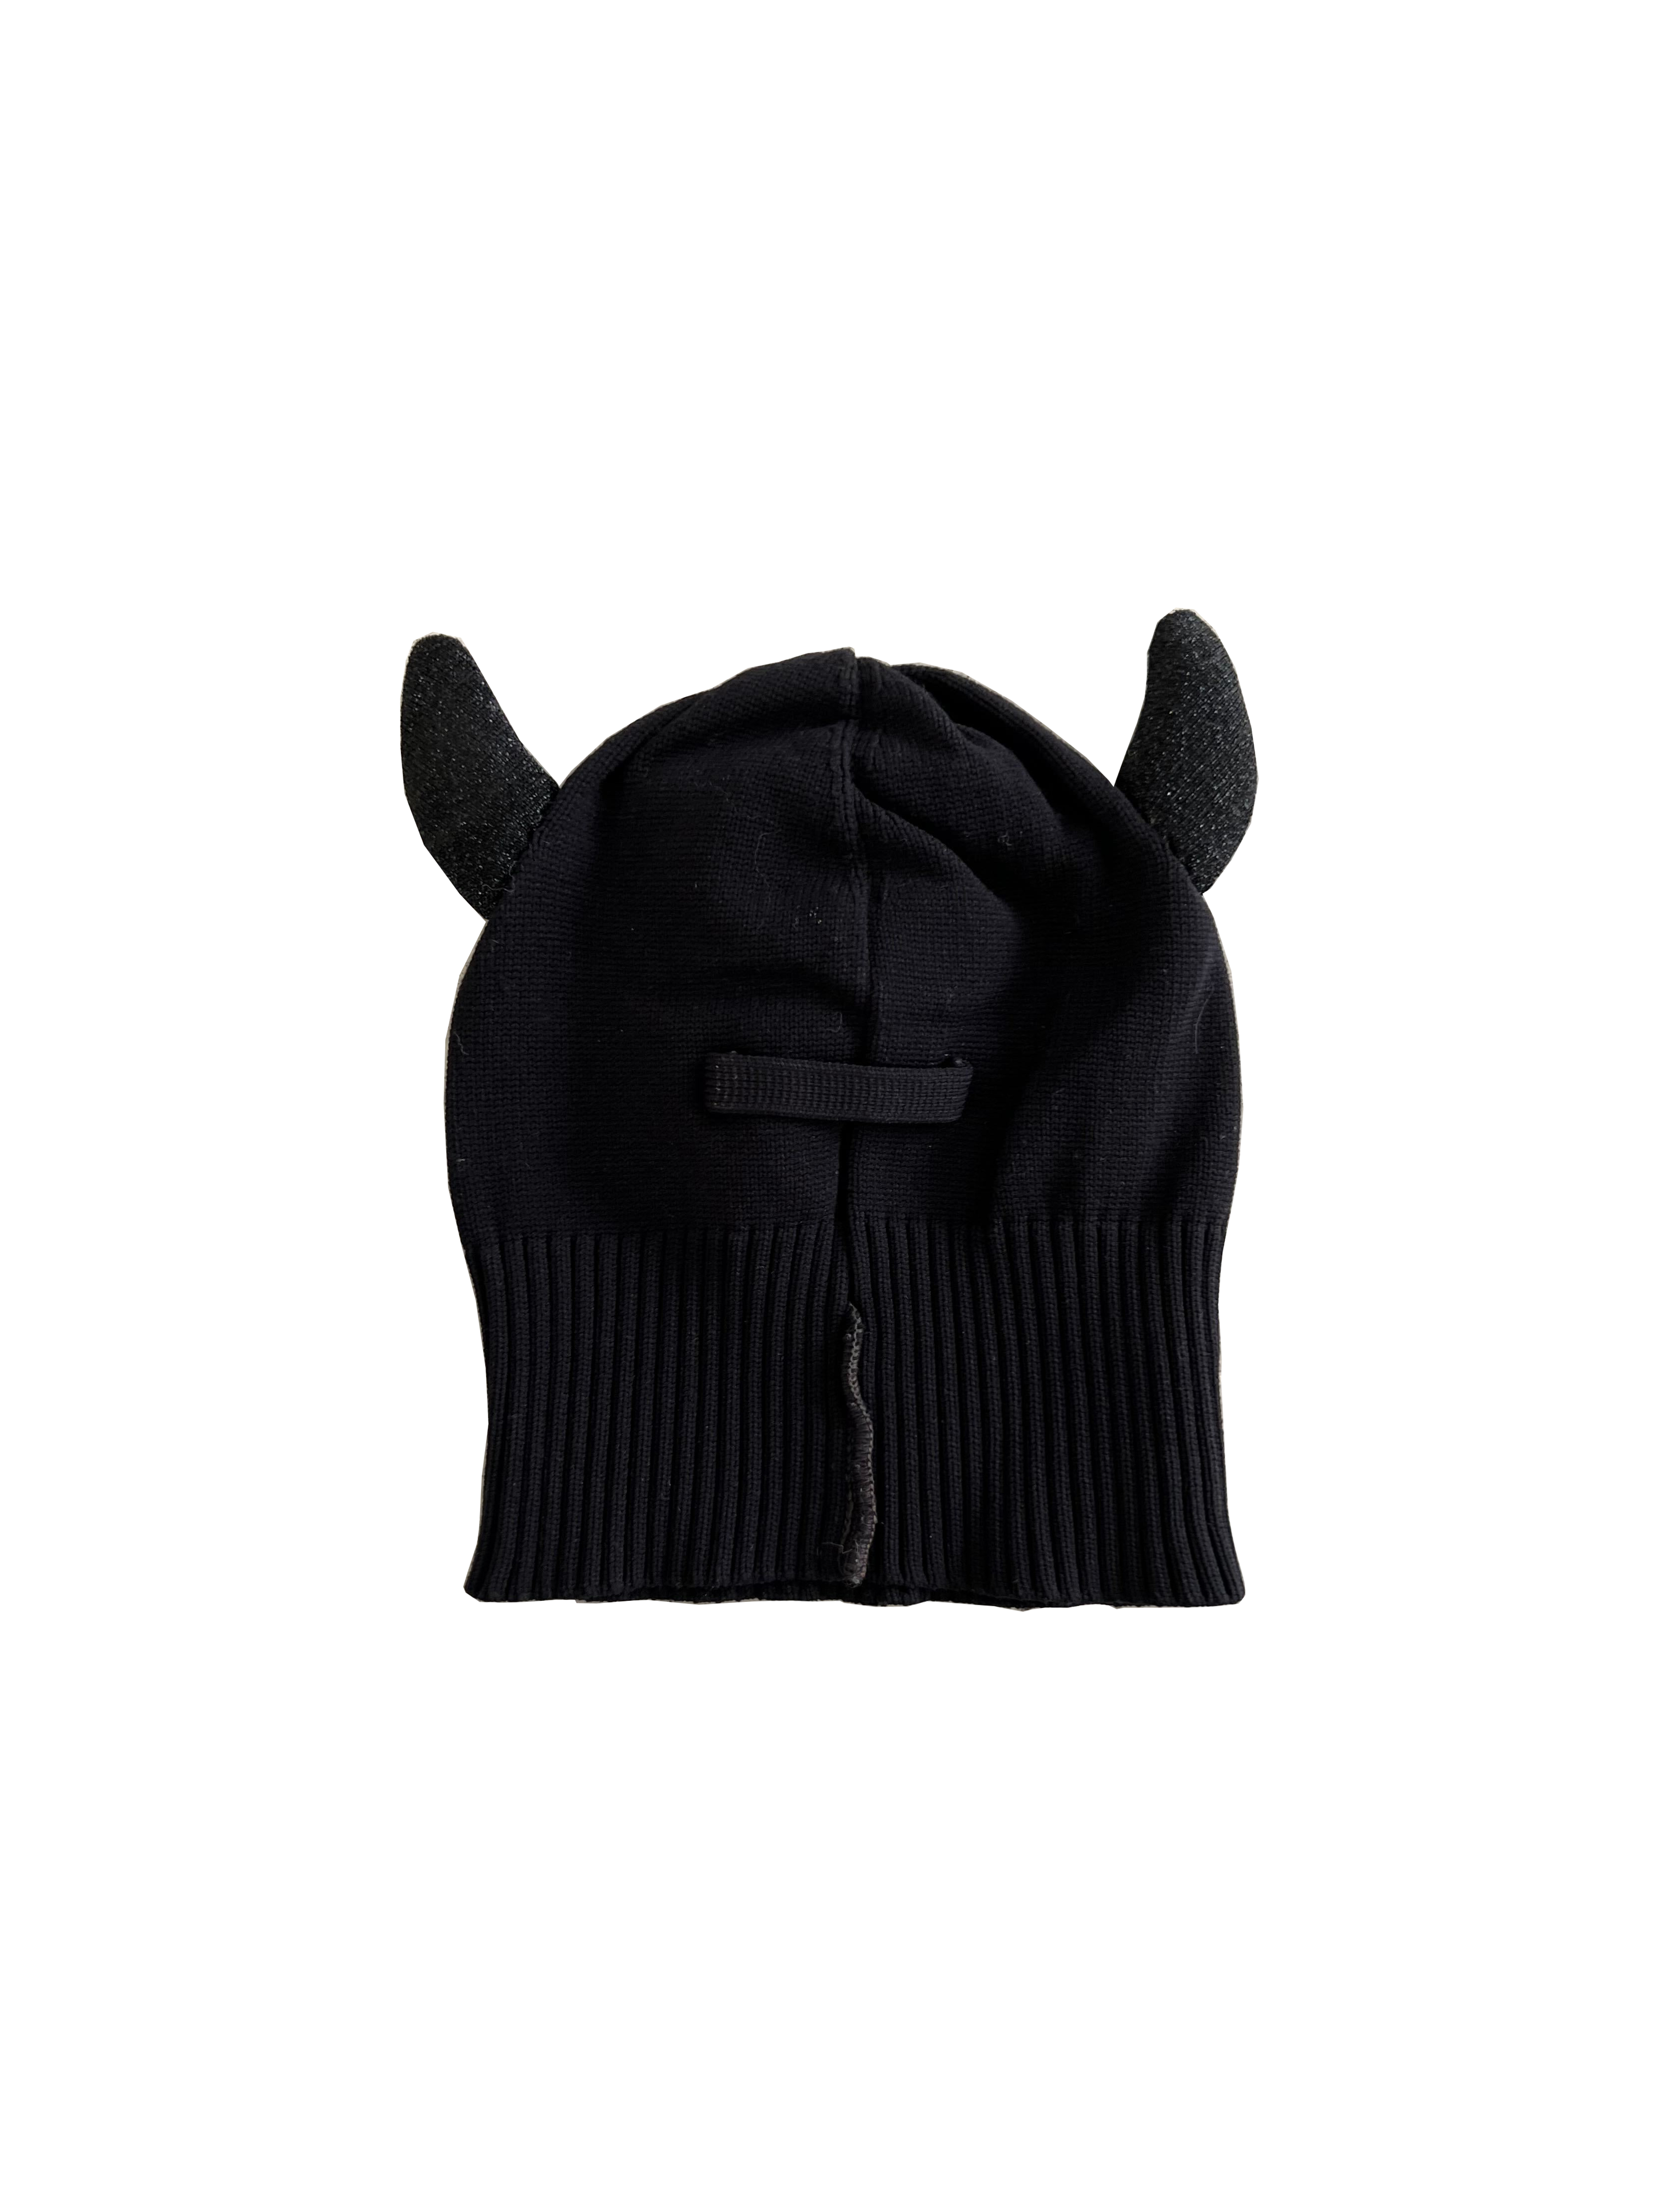 Jean Paul Gaultier AW 1993 Rare Knit Hat · INTO